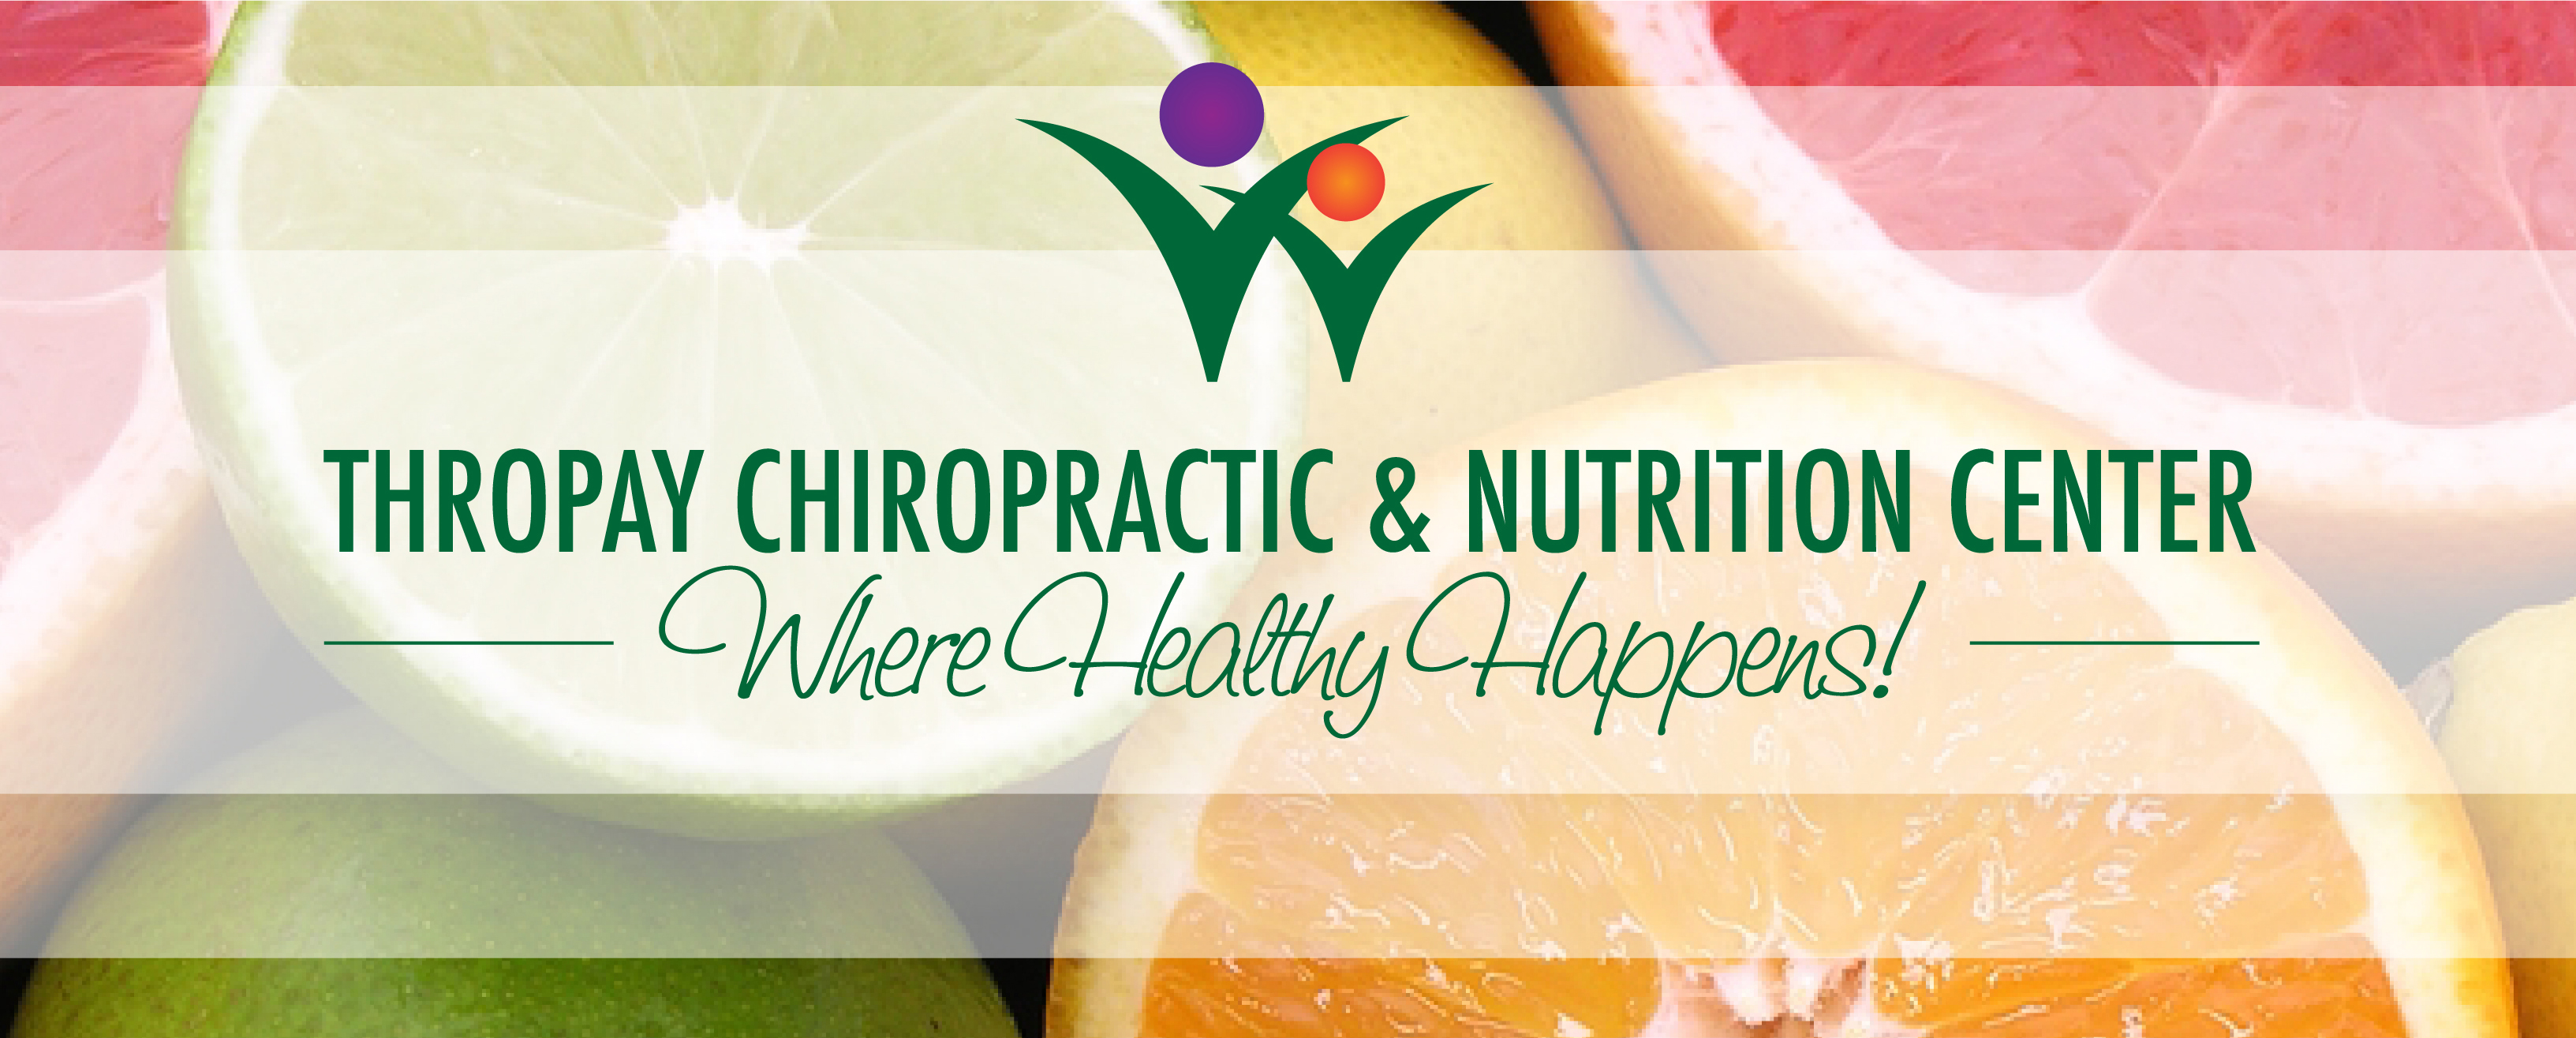 Thropay Chiropractic & Nutrition Center!